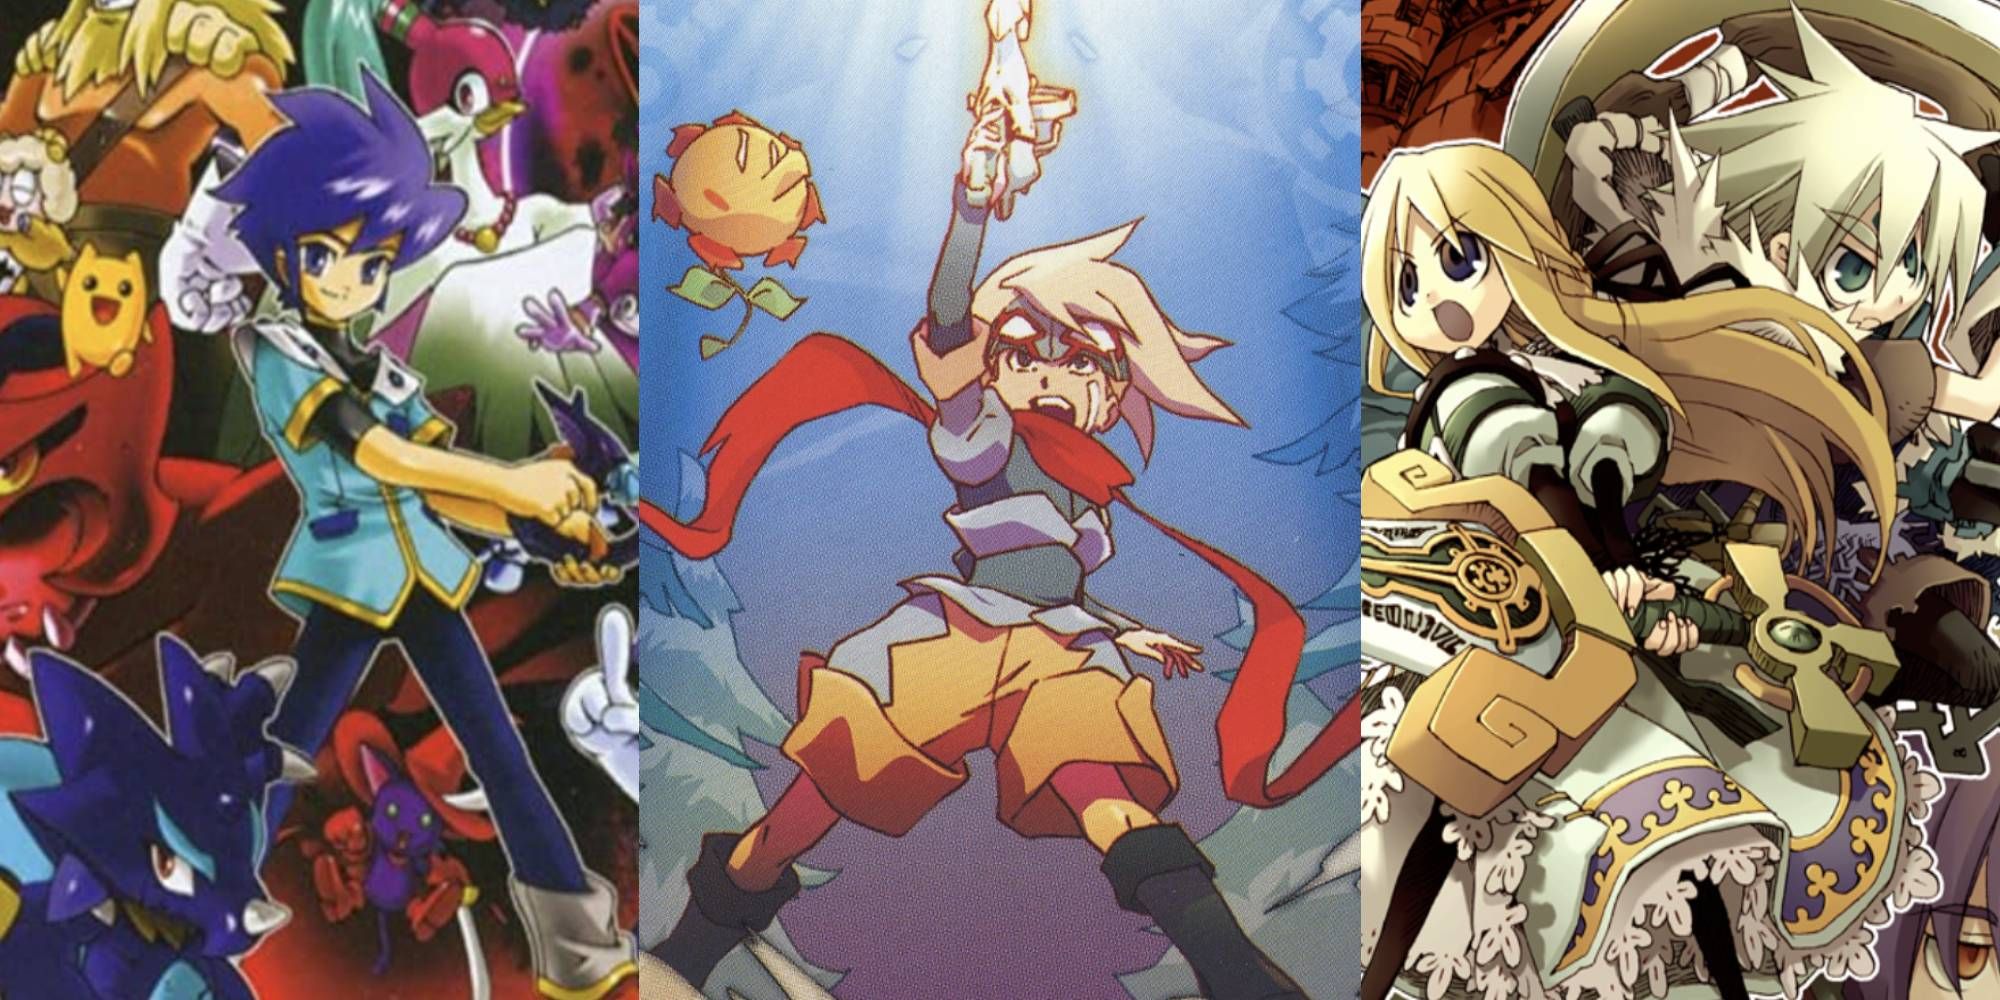 10 Best Underrated RPGs On The Game Boy Advance